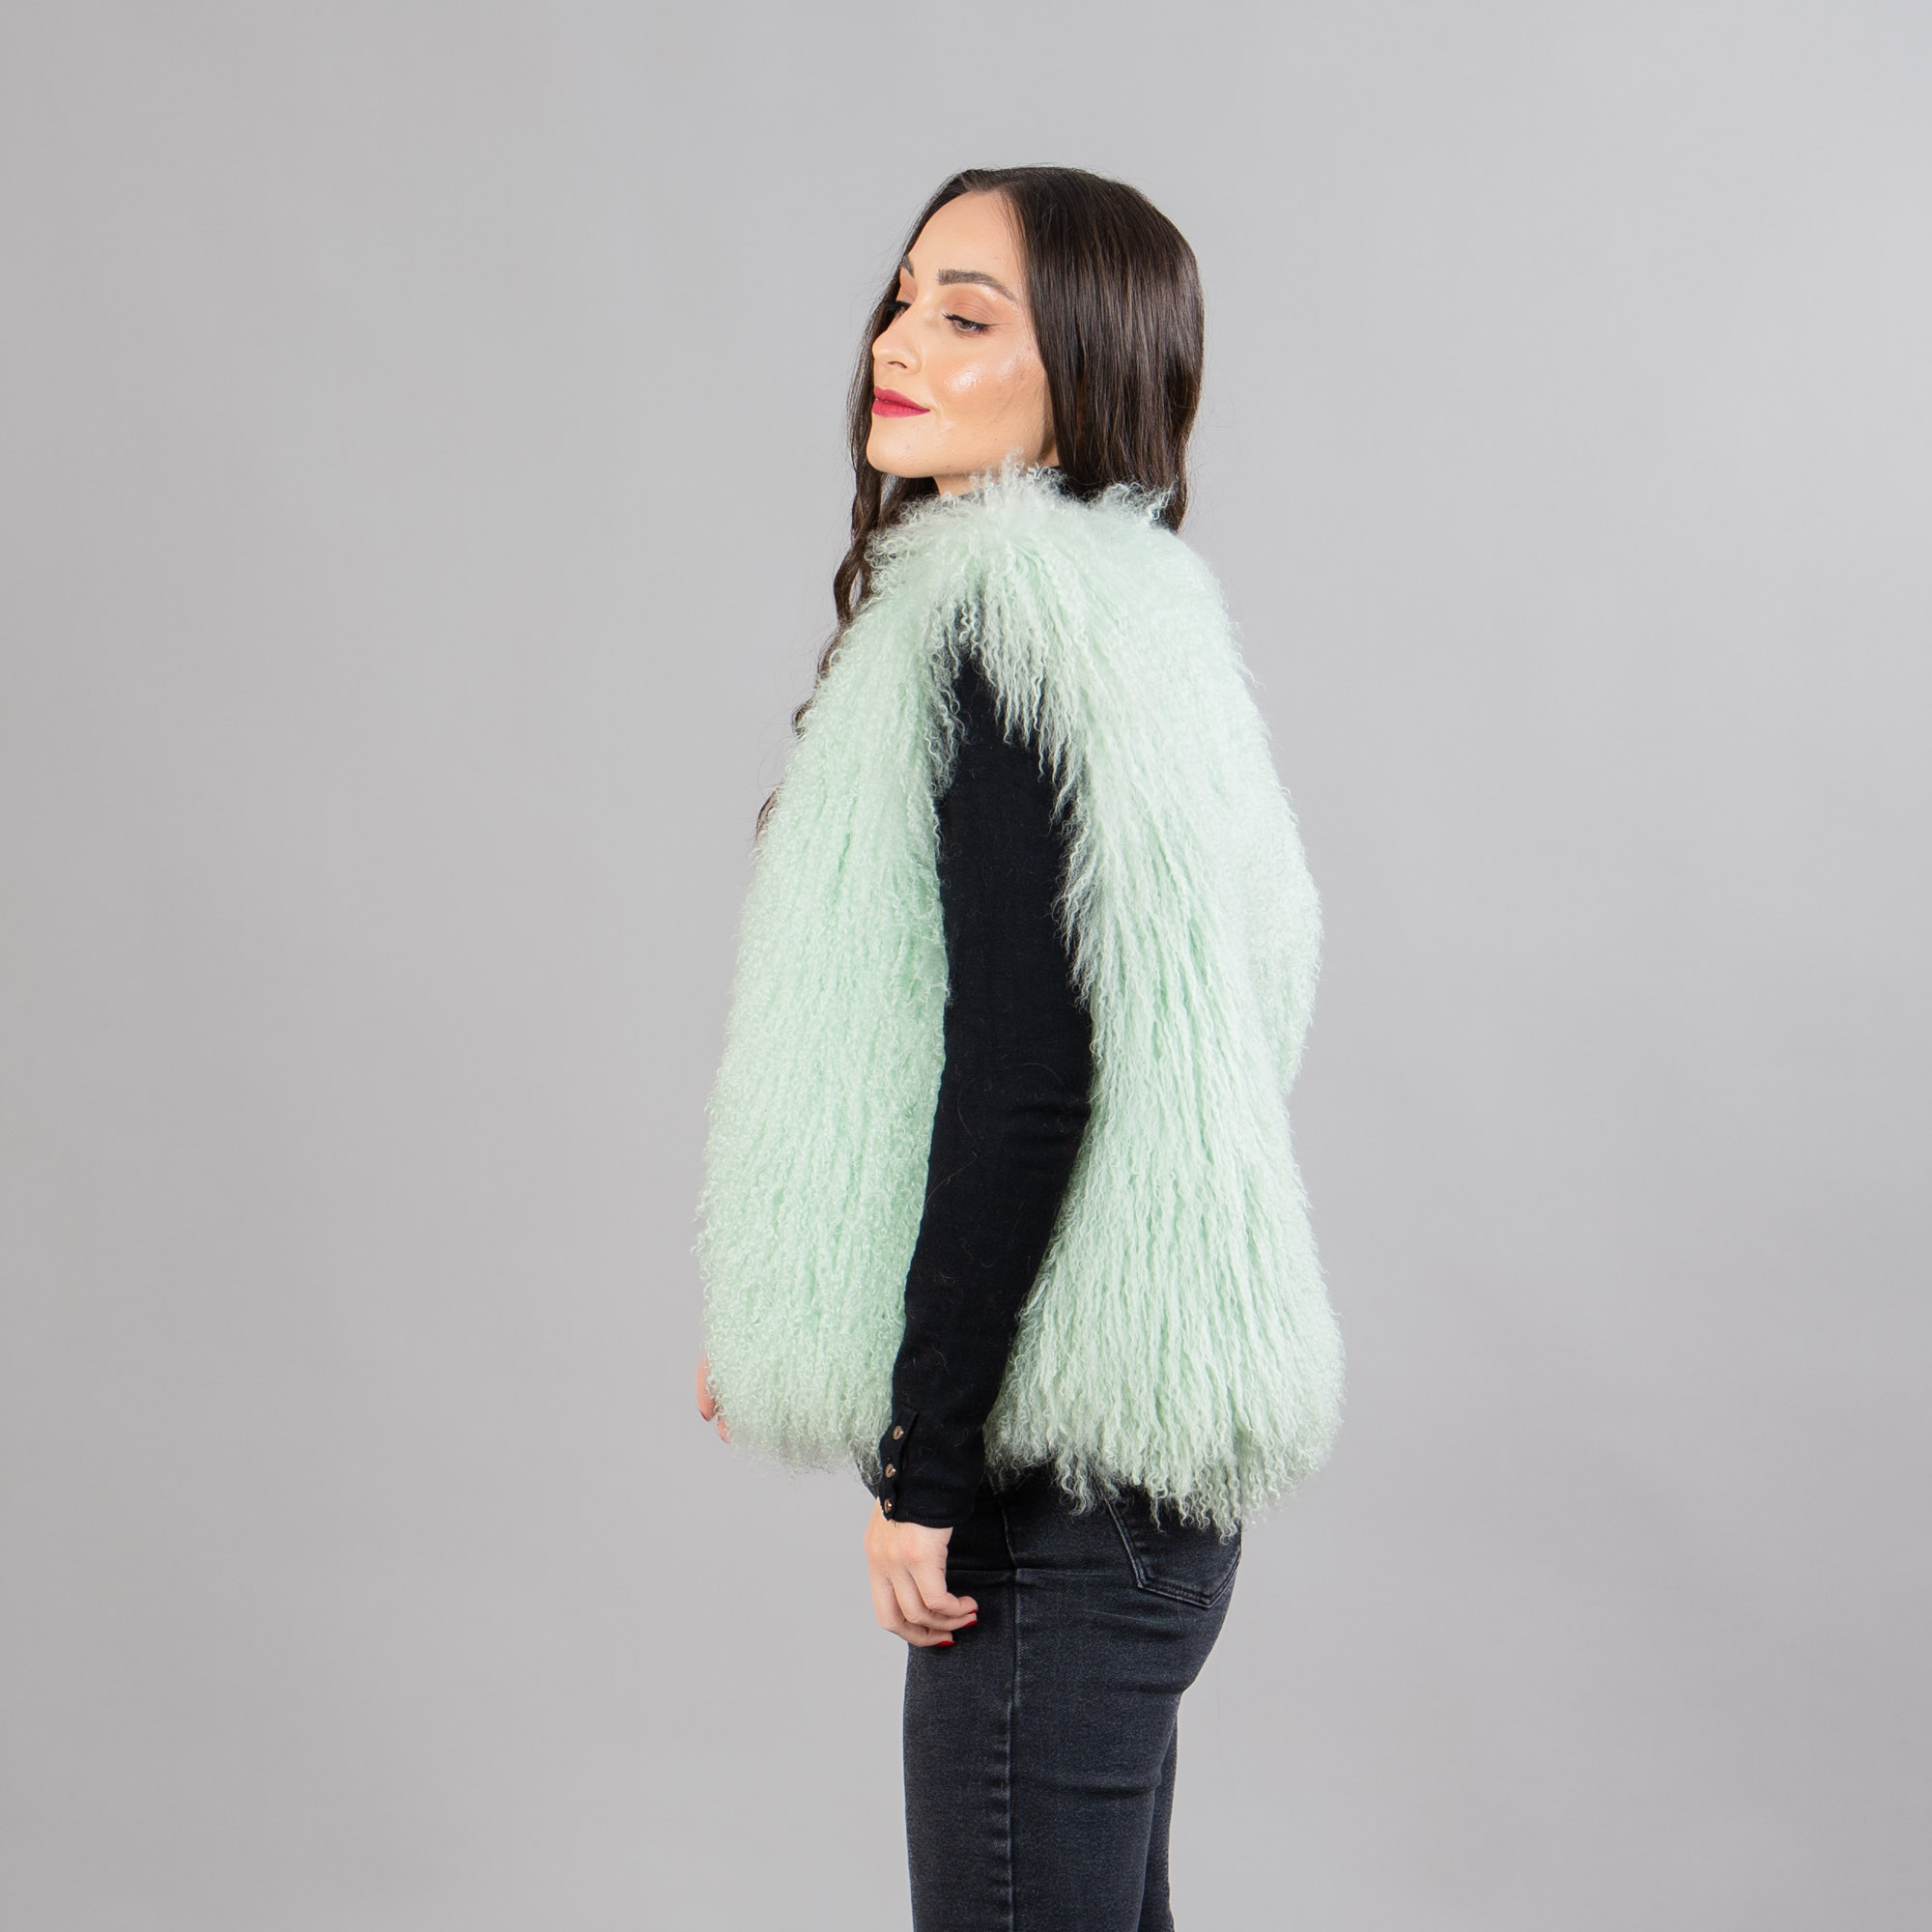 Mongolian sheep fur vest in green color